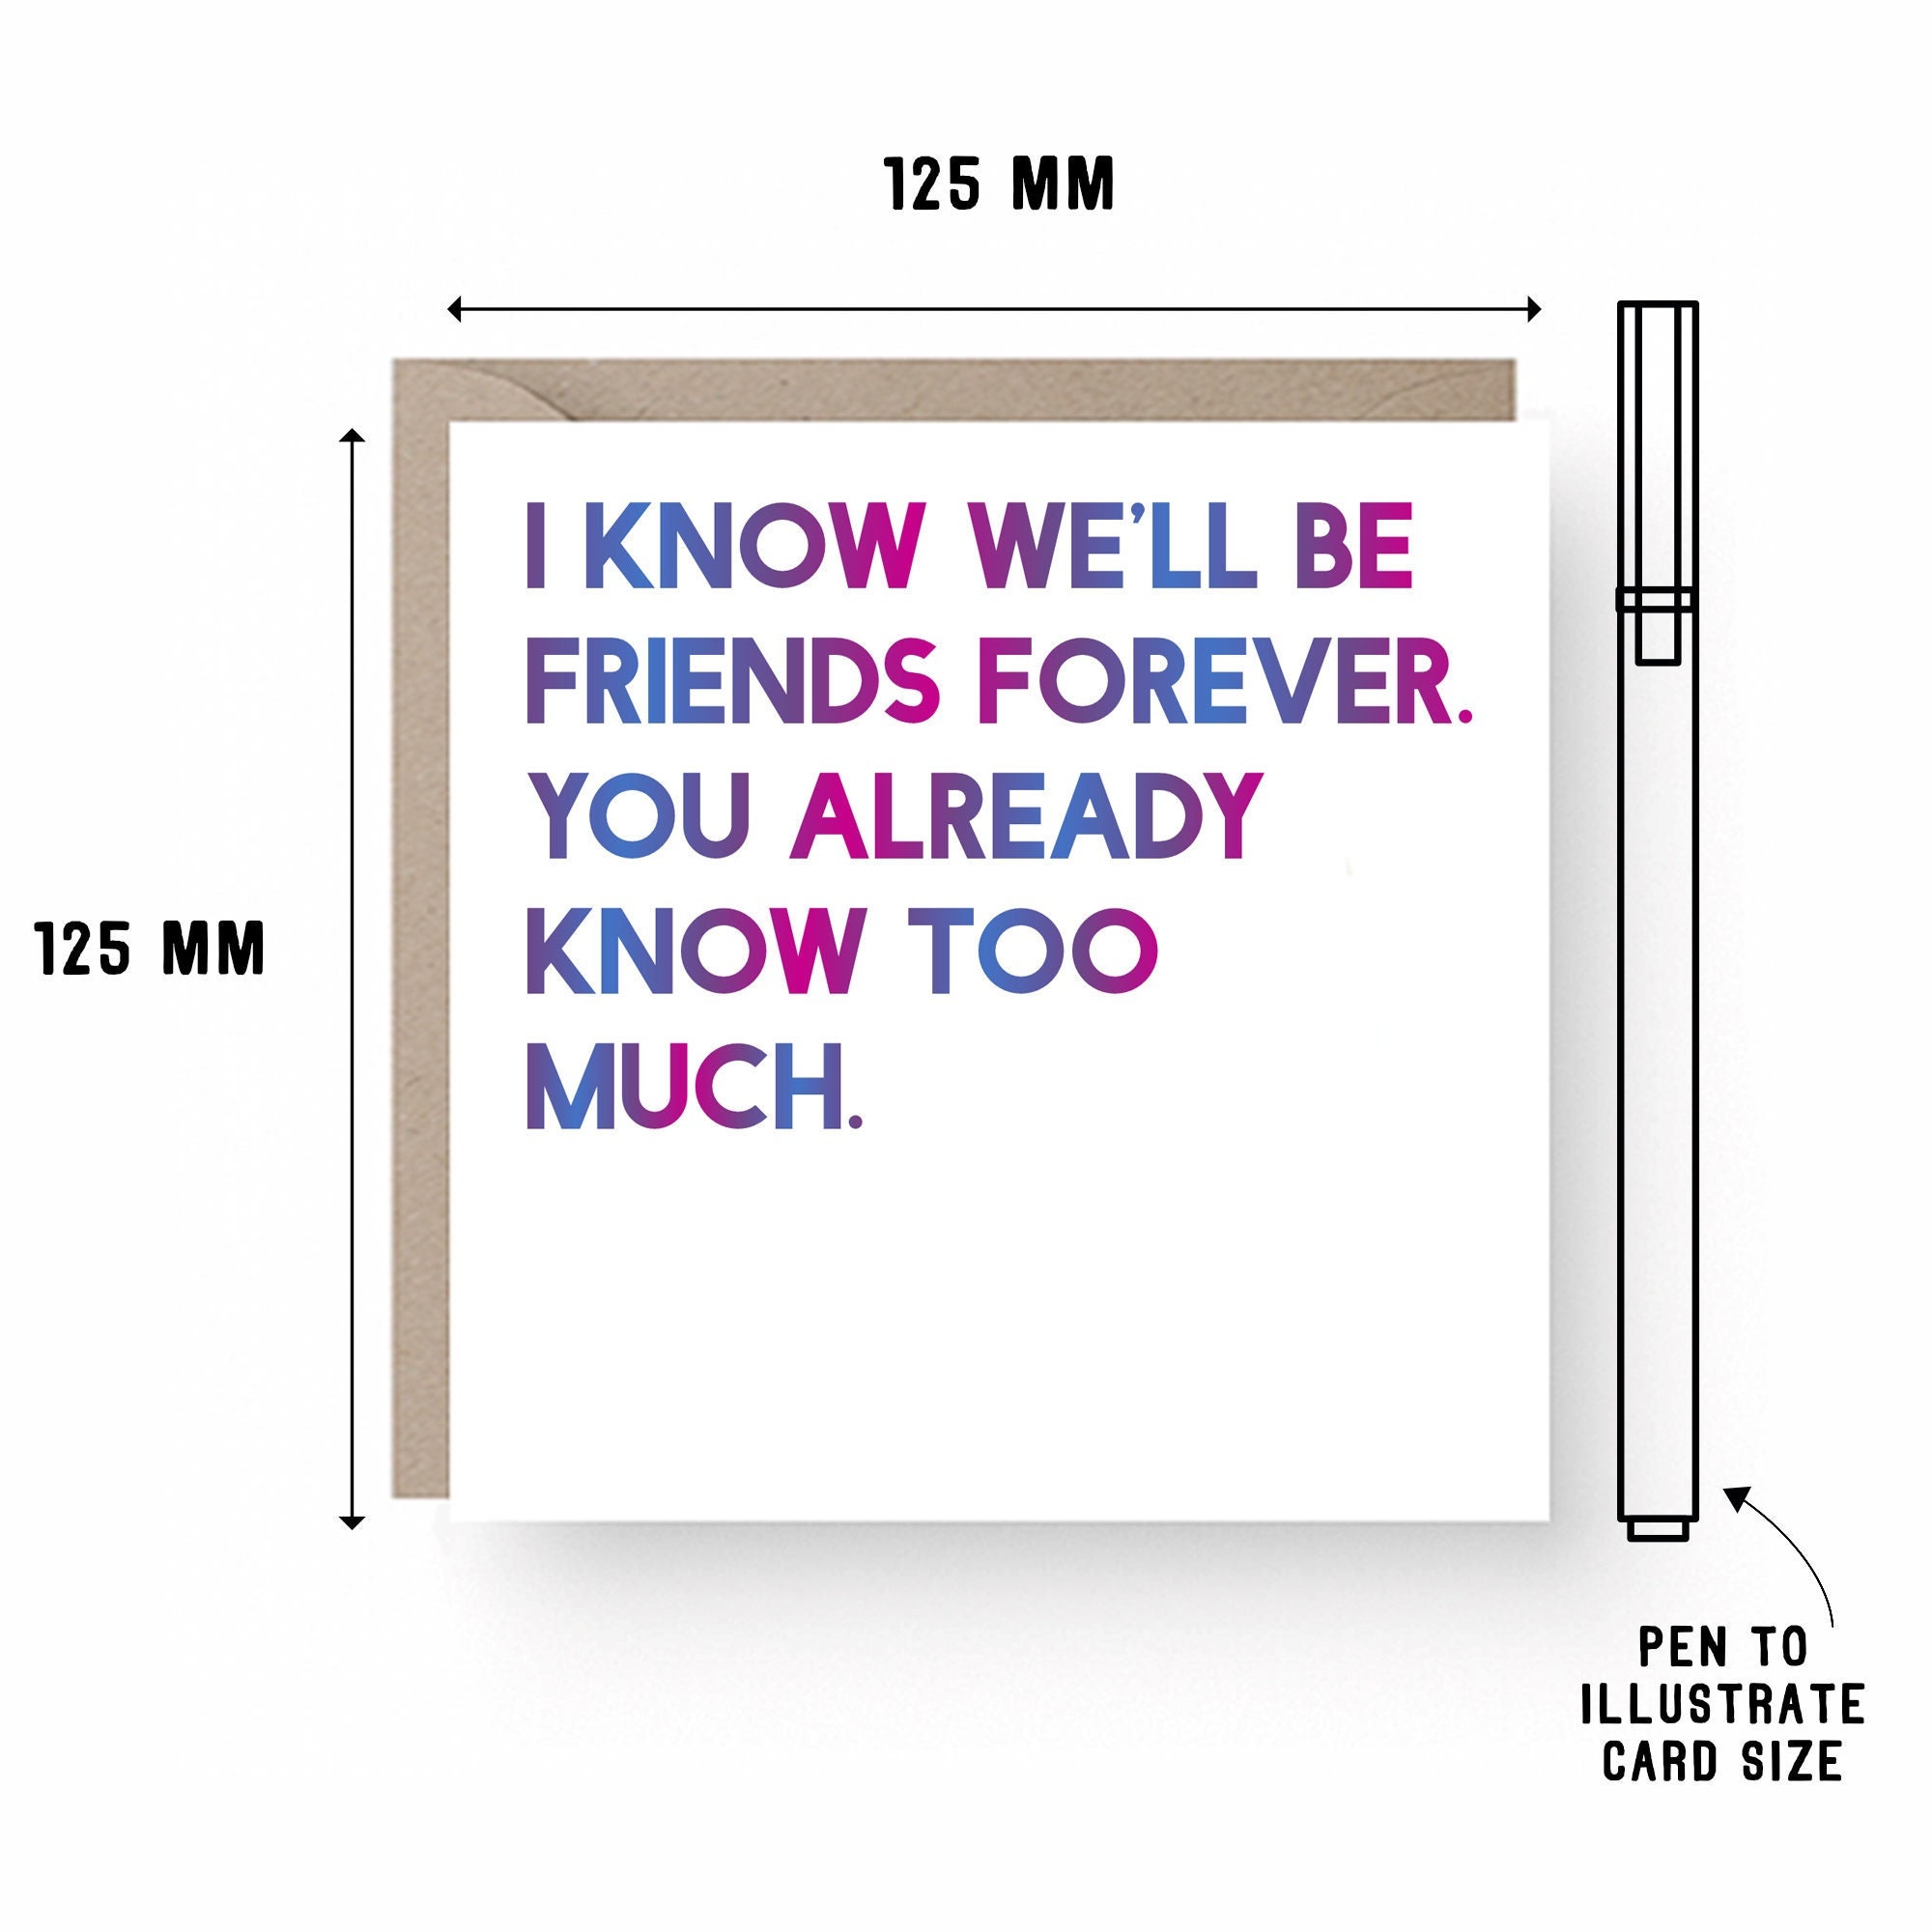 Funny Thinking of You Card, Just Because Cards for Friends, Get